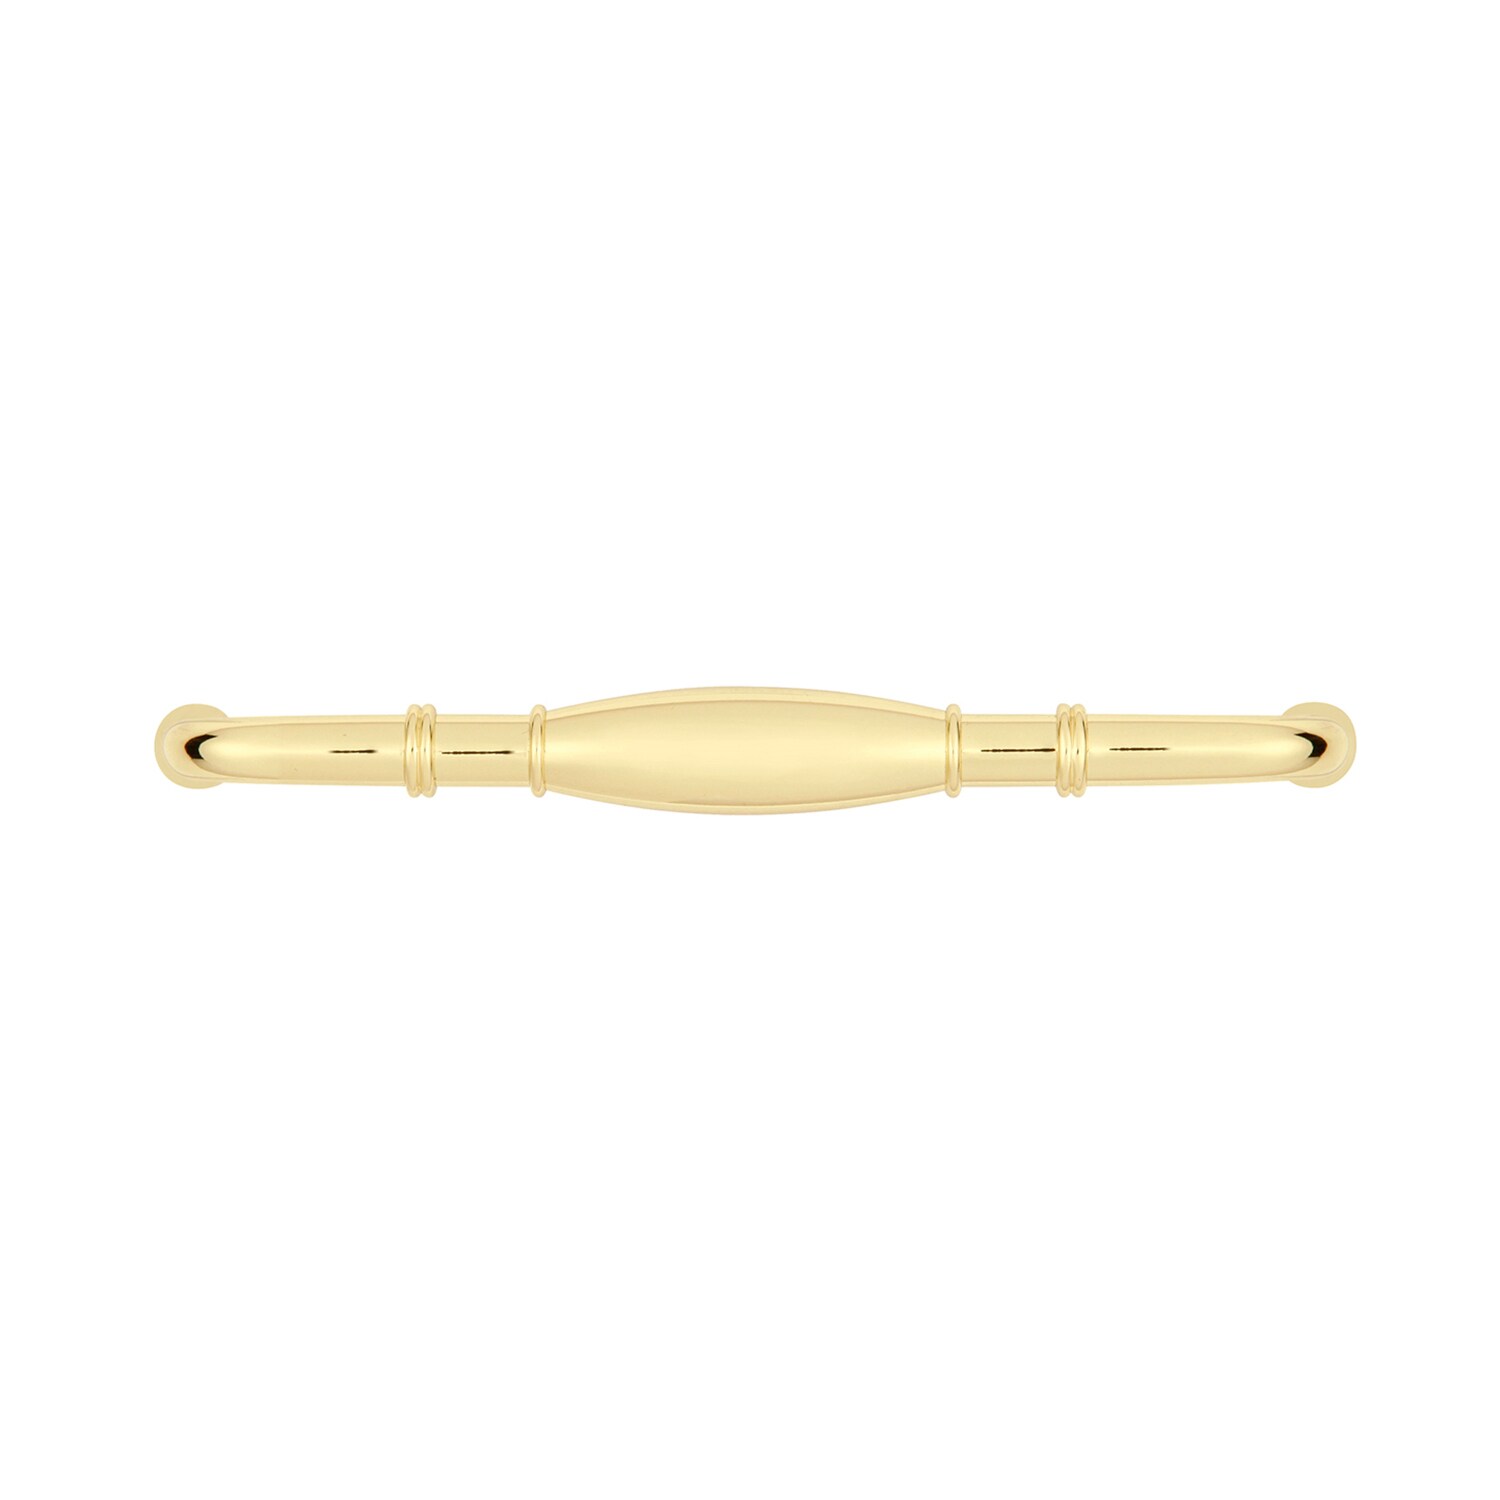 Hickory Hardware Williamsburg 1-1/4-in Polished Brass Oval